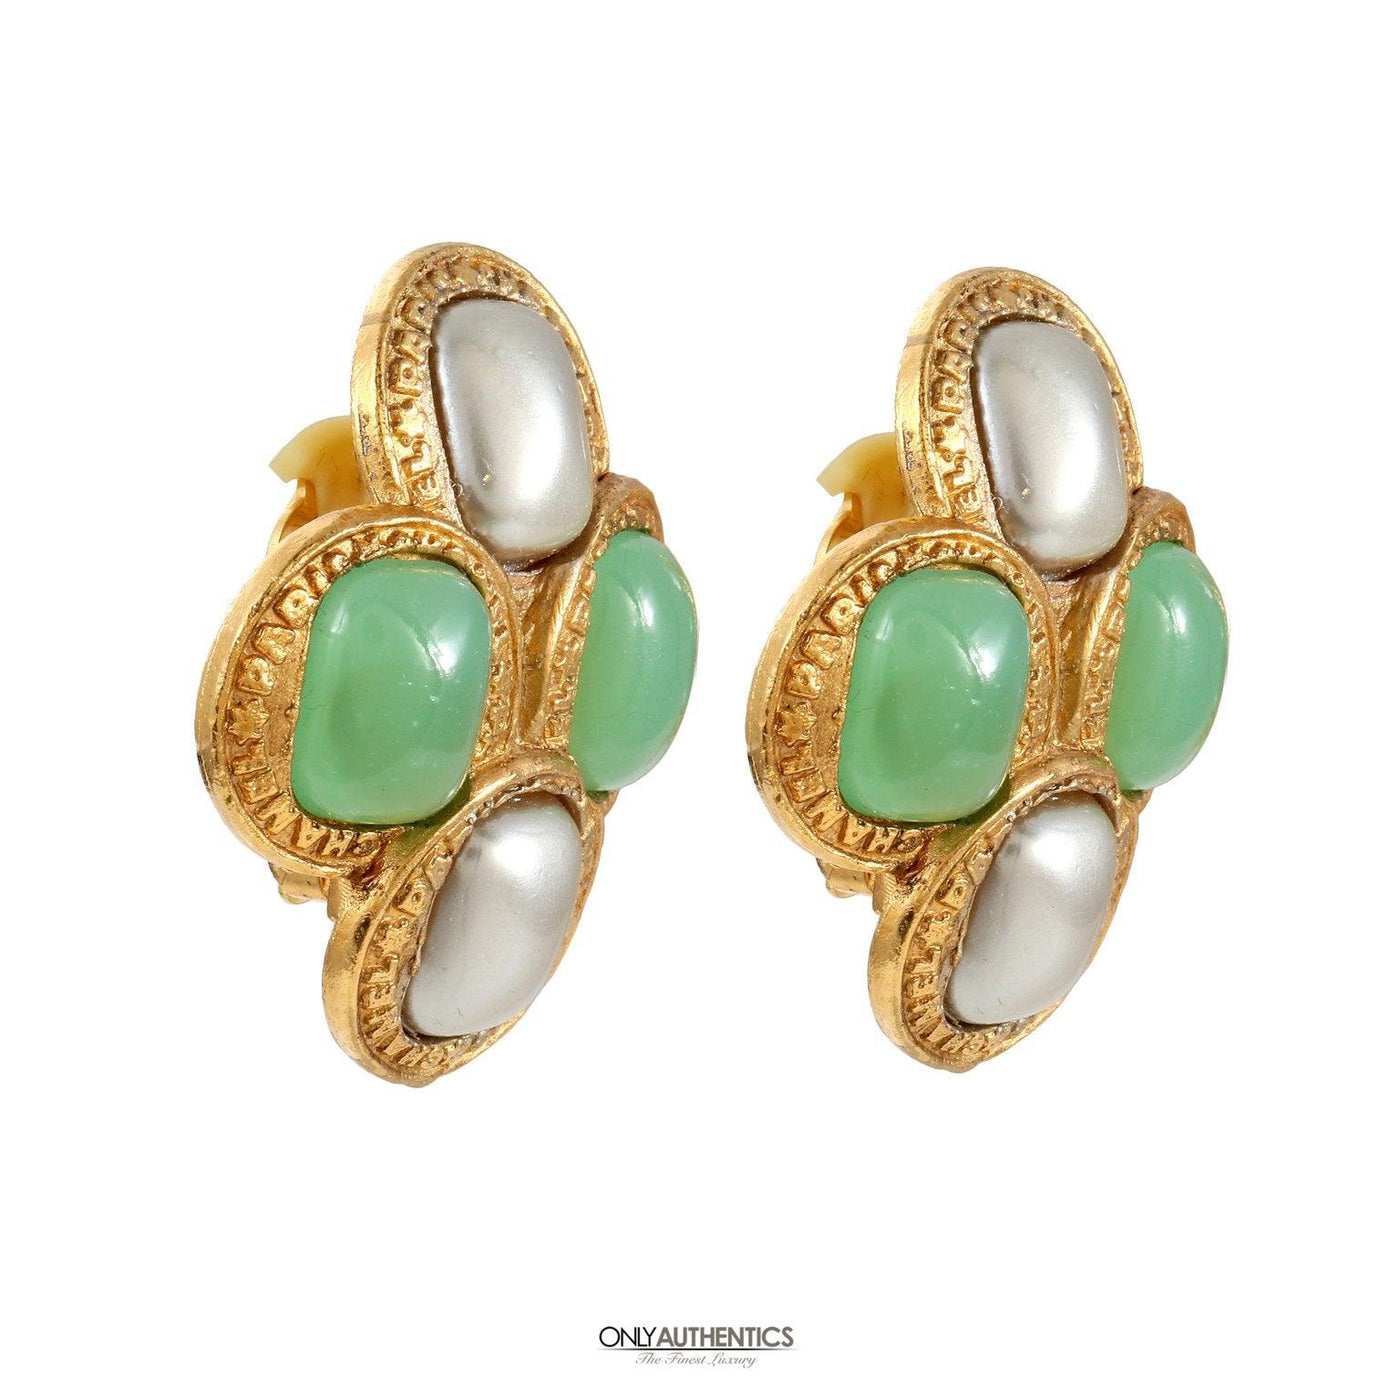 Chanel Green Gripoix and Pearl Earrings - Only Authentics